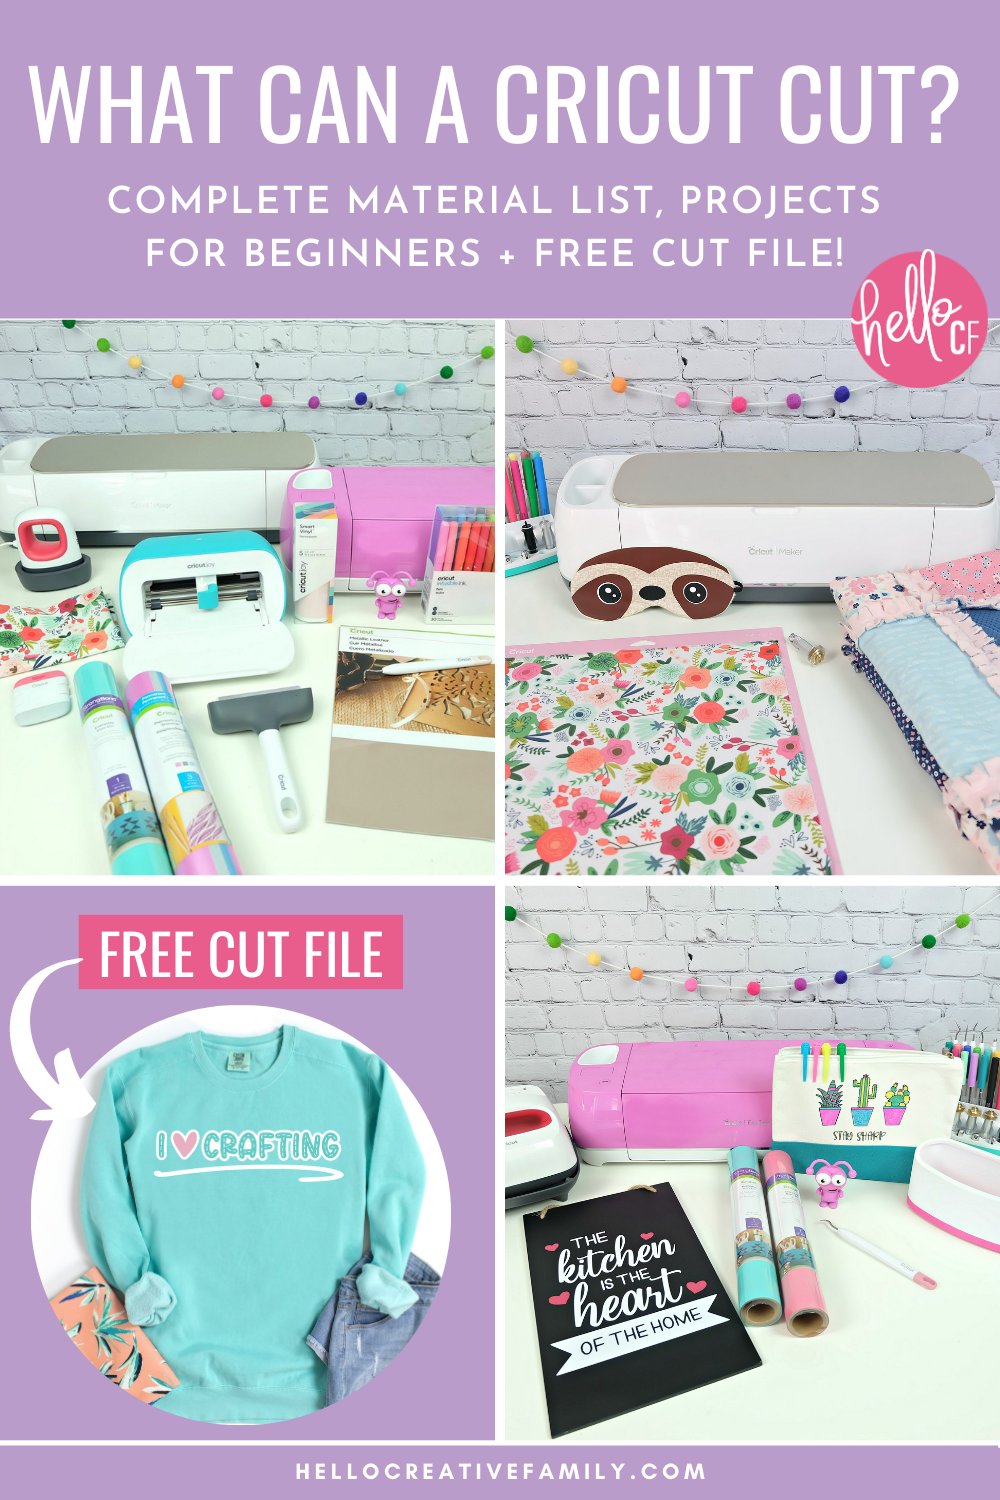 What Materials Can A Cricut Cut? Complete material list, Projects for beginners + FREE cut file!